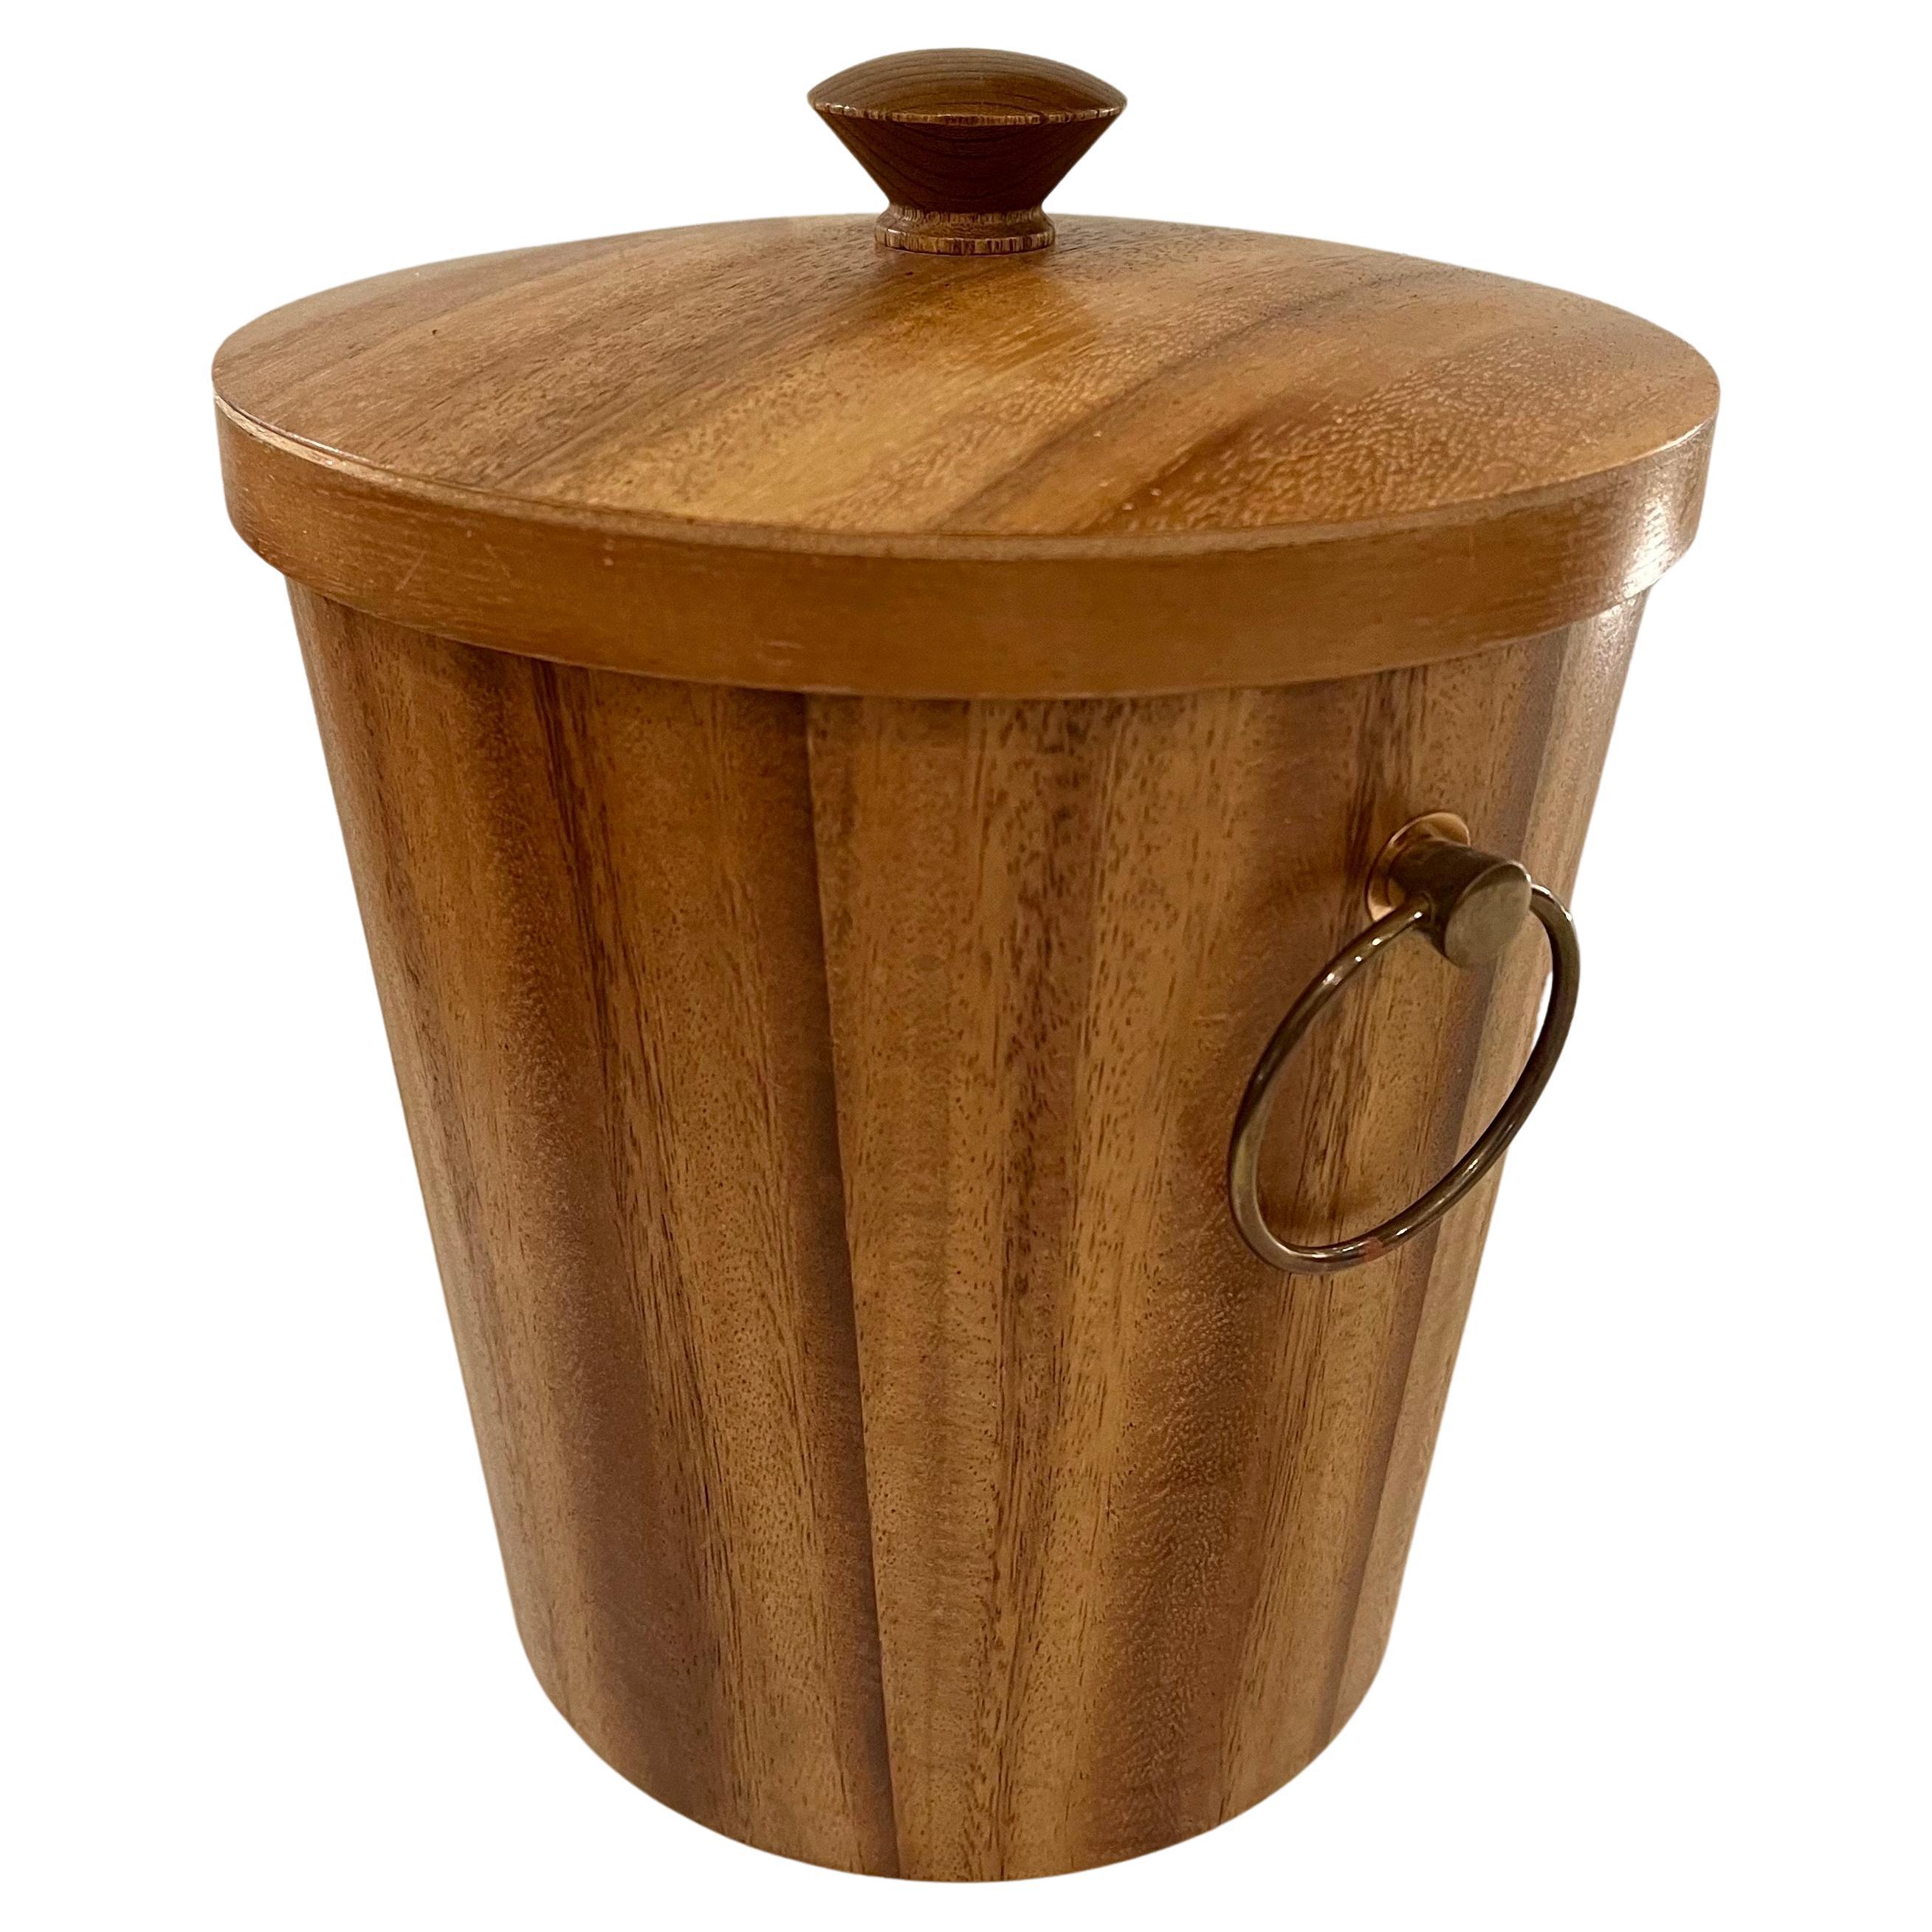 Unique and beautifully crafted Danish midcentury walnut with brass handles ice bucket. This piece has minimal, clean lines while enveloped in the grain of light walnut with an insert of aluminum. Linear in shape but rich in style.